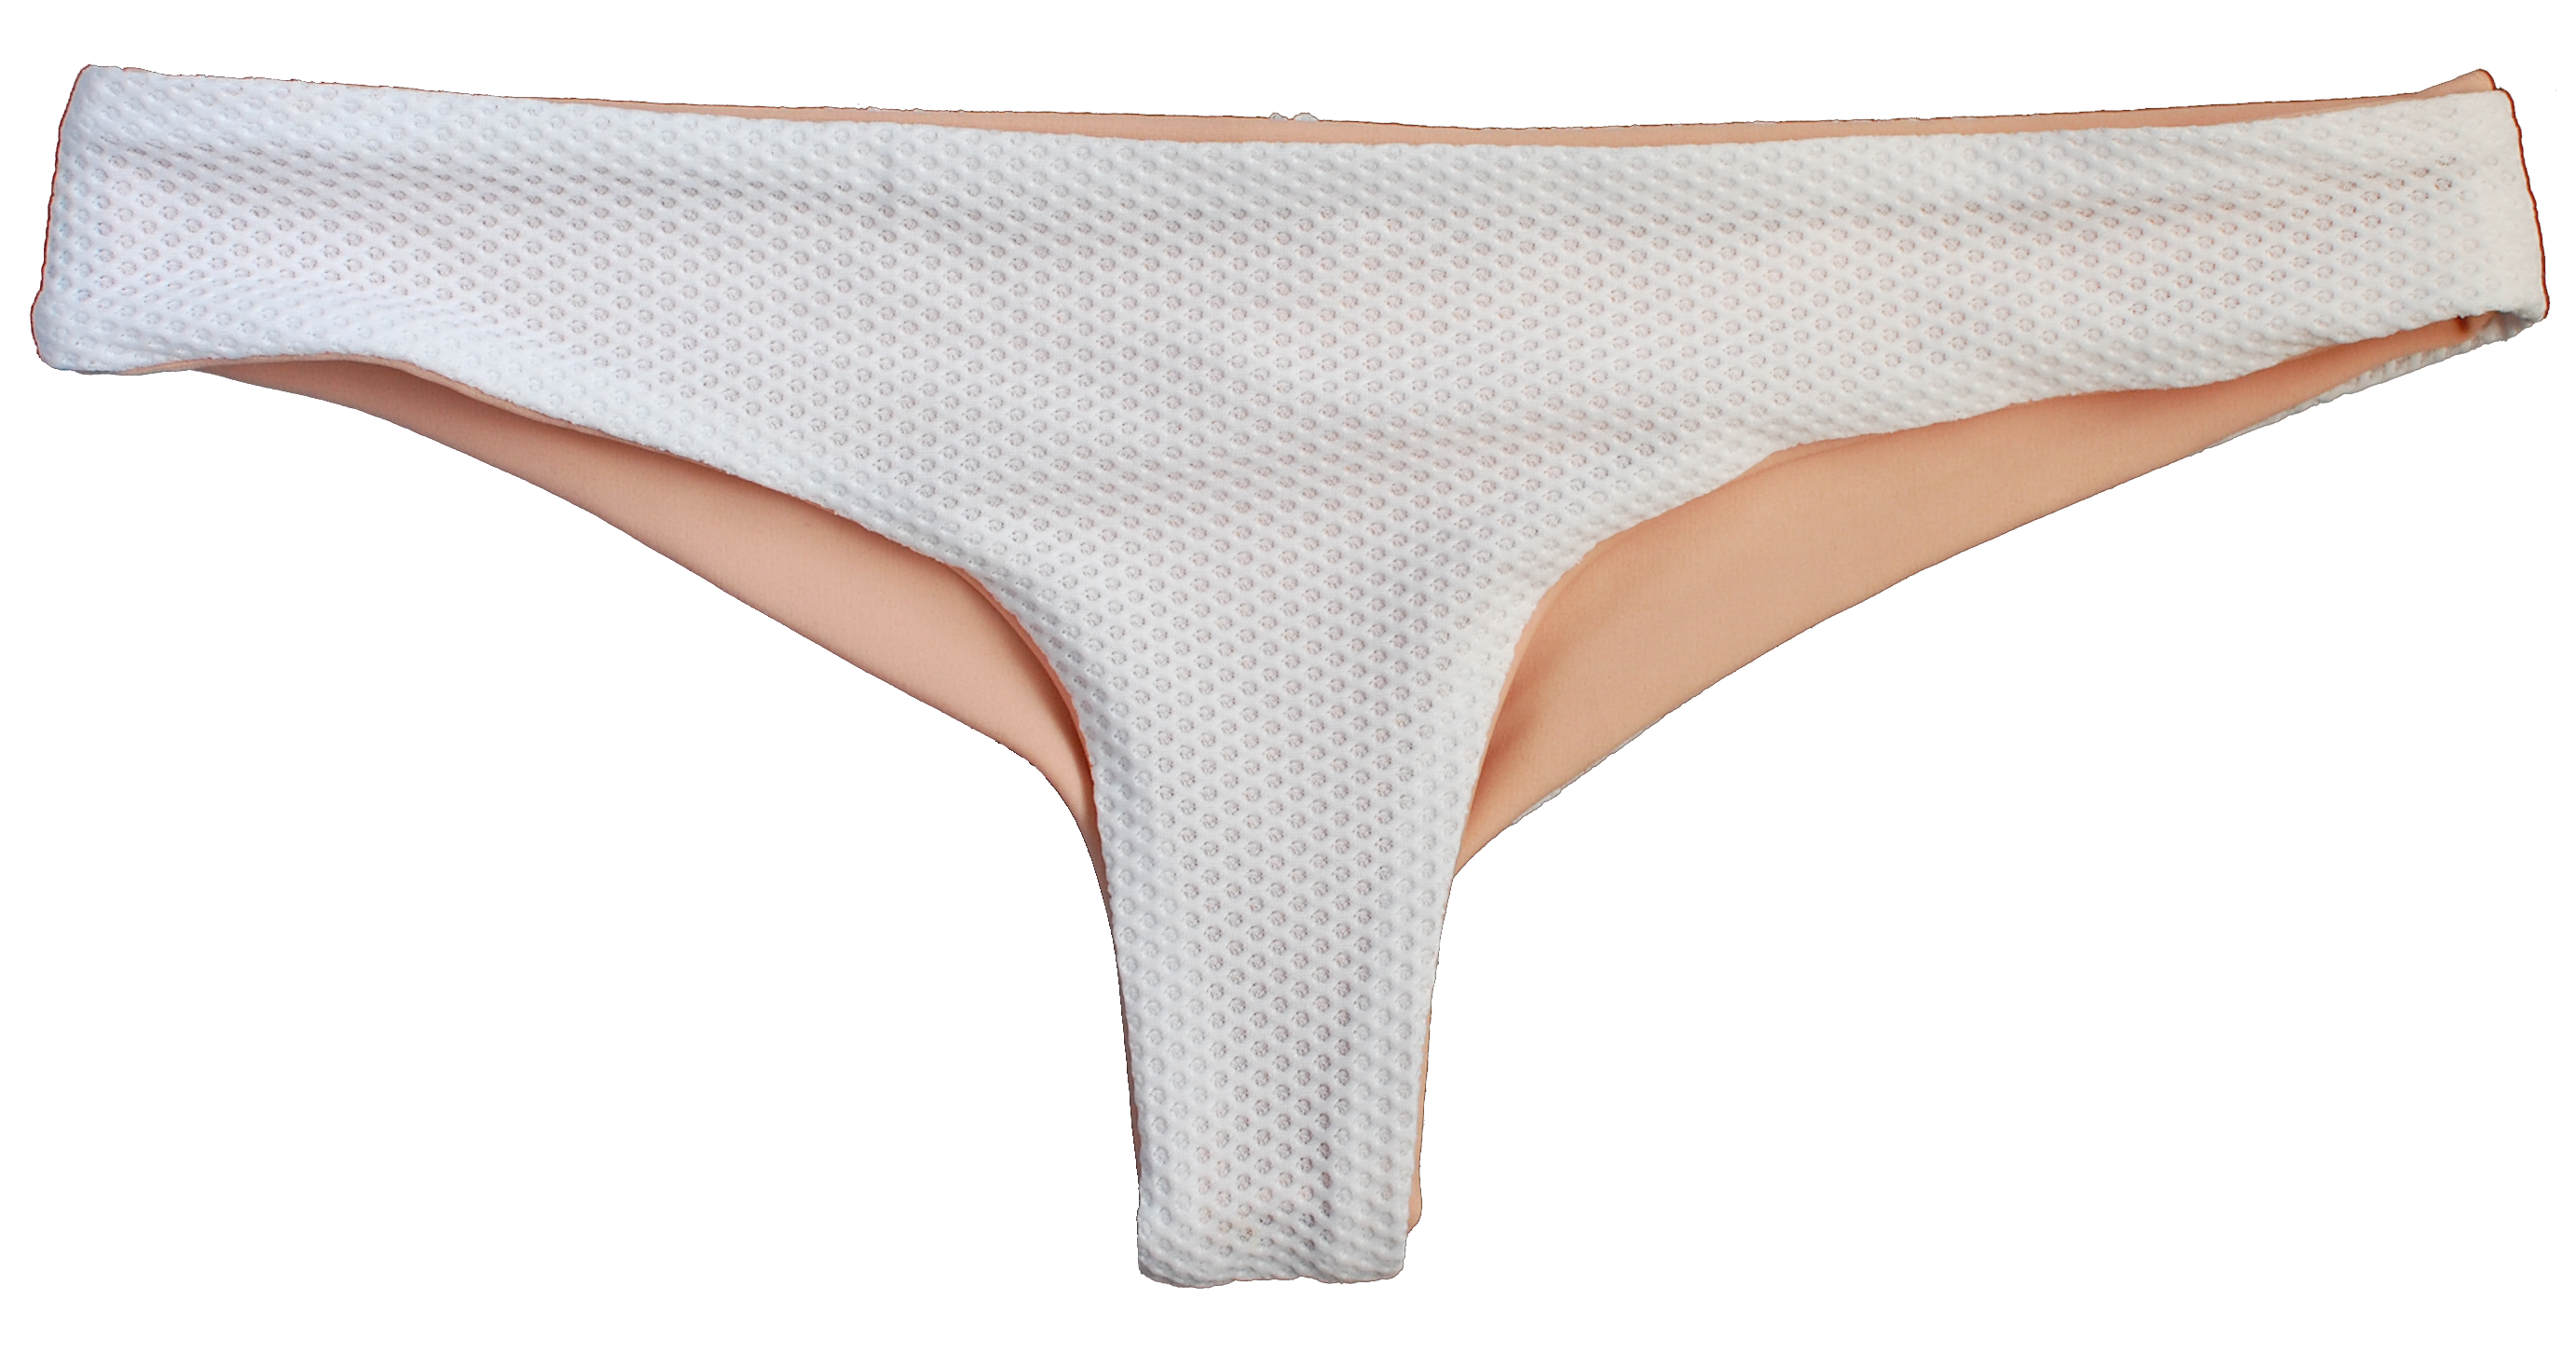 White textured low rise cheeky bottoms